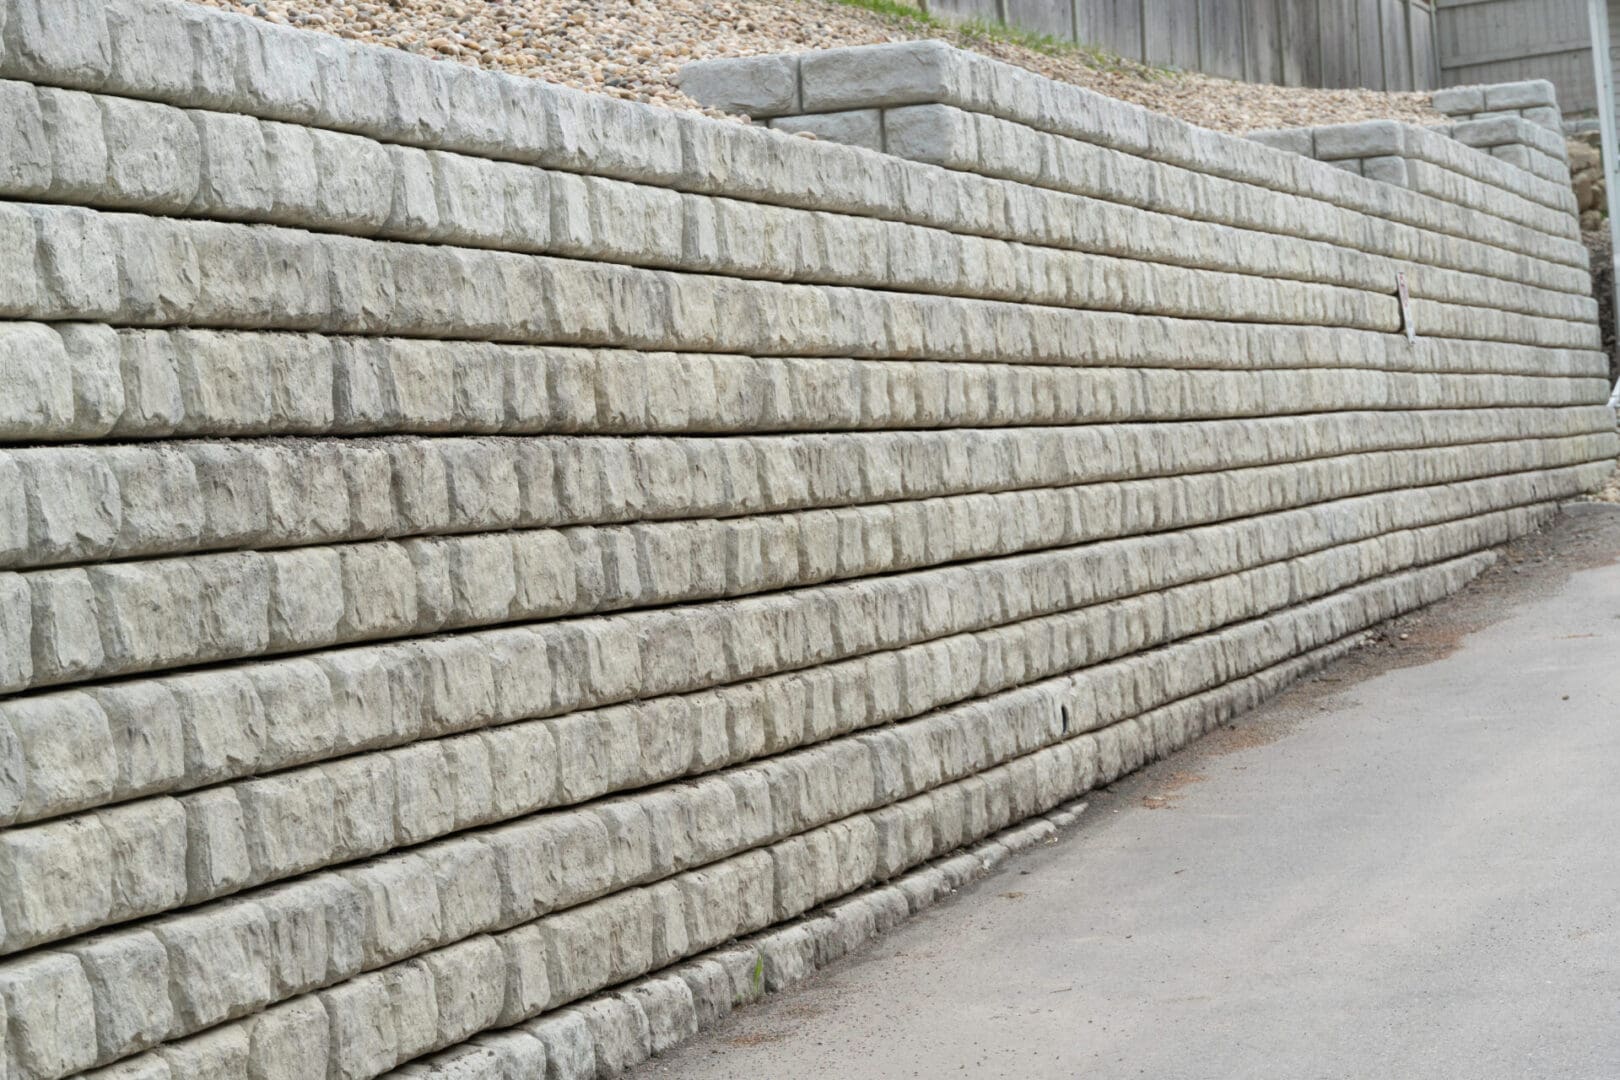 A stone wall with a sidewalk in the background.